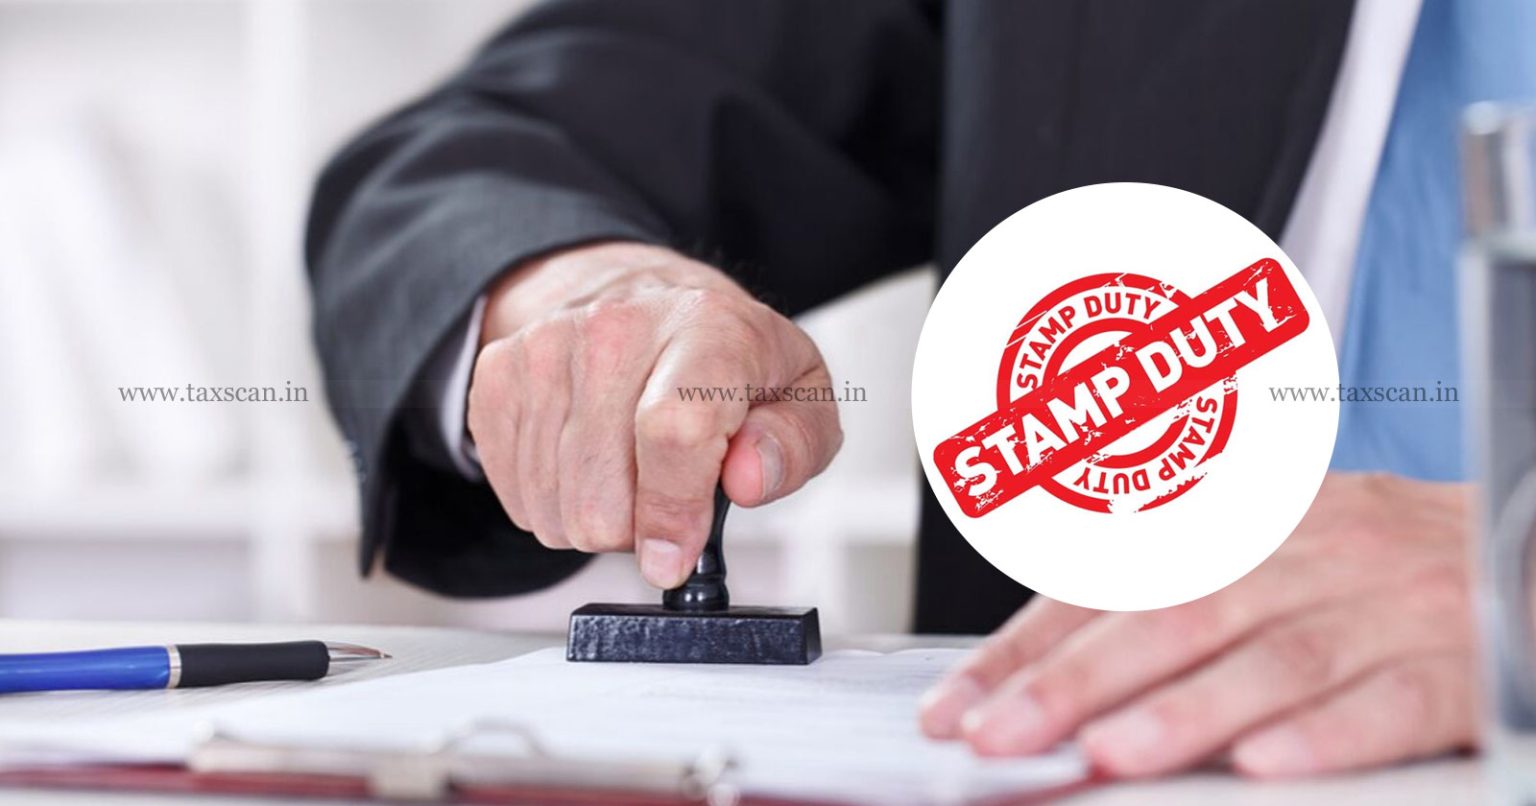 Stamp Duty Value - Stamp Duty - Registration - ITAT - itat mumbai - Date of Allotment - IT act - taxscan